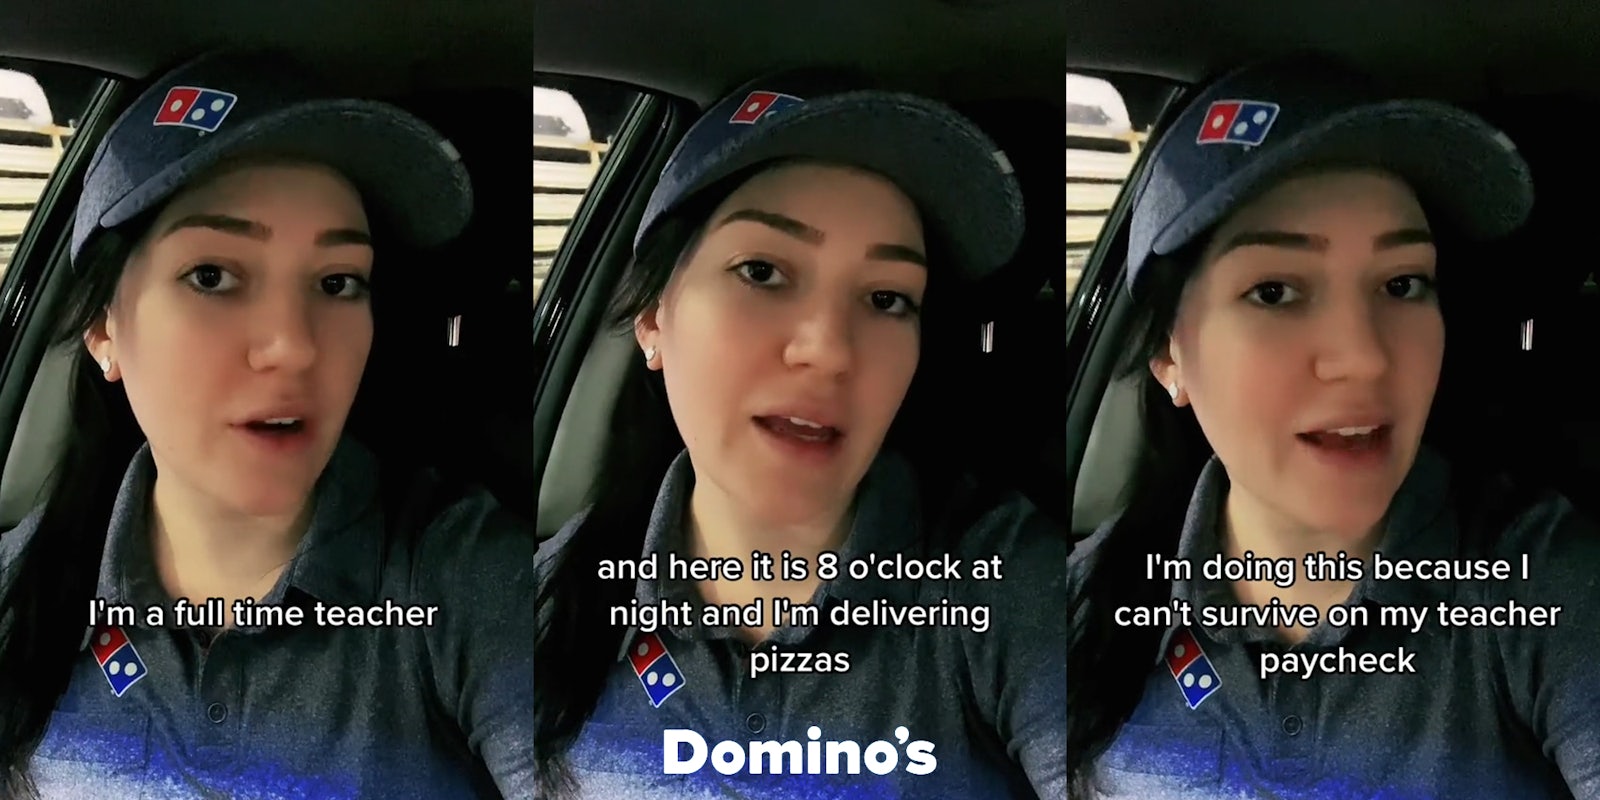 Domino's employee/teacher speaking in car with caption 'I'm a full time teacher' (l) Domino's employee/teacher speaking in car with caption 'and here it is 8 o'clock at night and I'm delivering pizzas' with Dominos logo at bottom (c) Domino's employee/teacher speaking in car with caption 'I'm doing this because I can't survive on my teacher paycheck' (r)